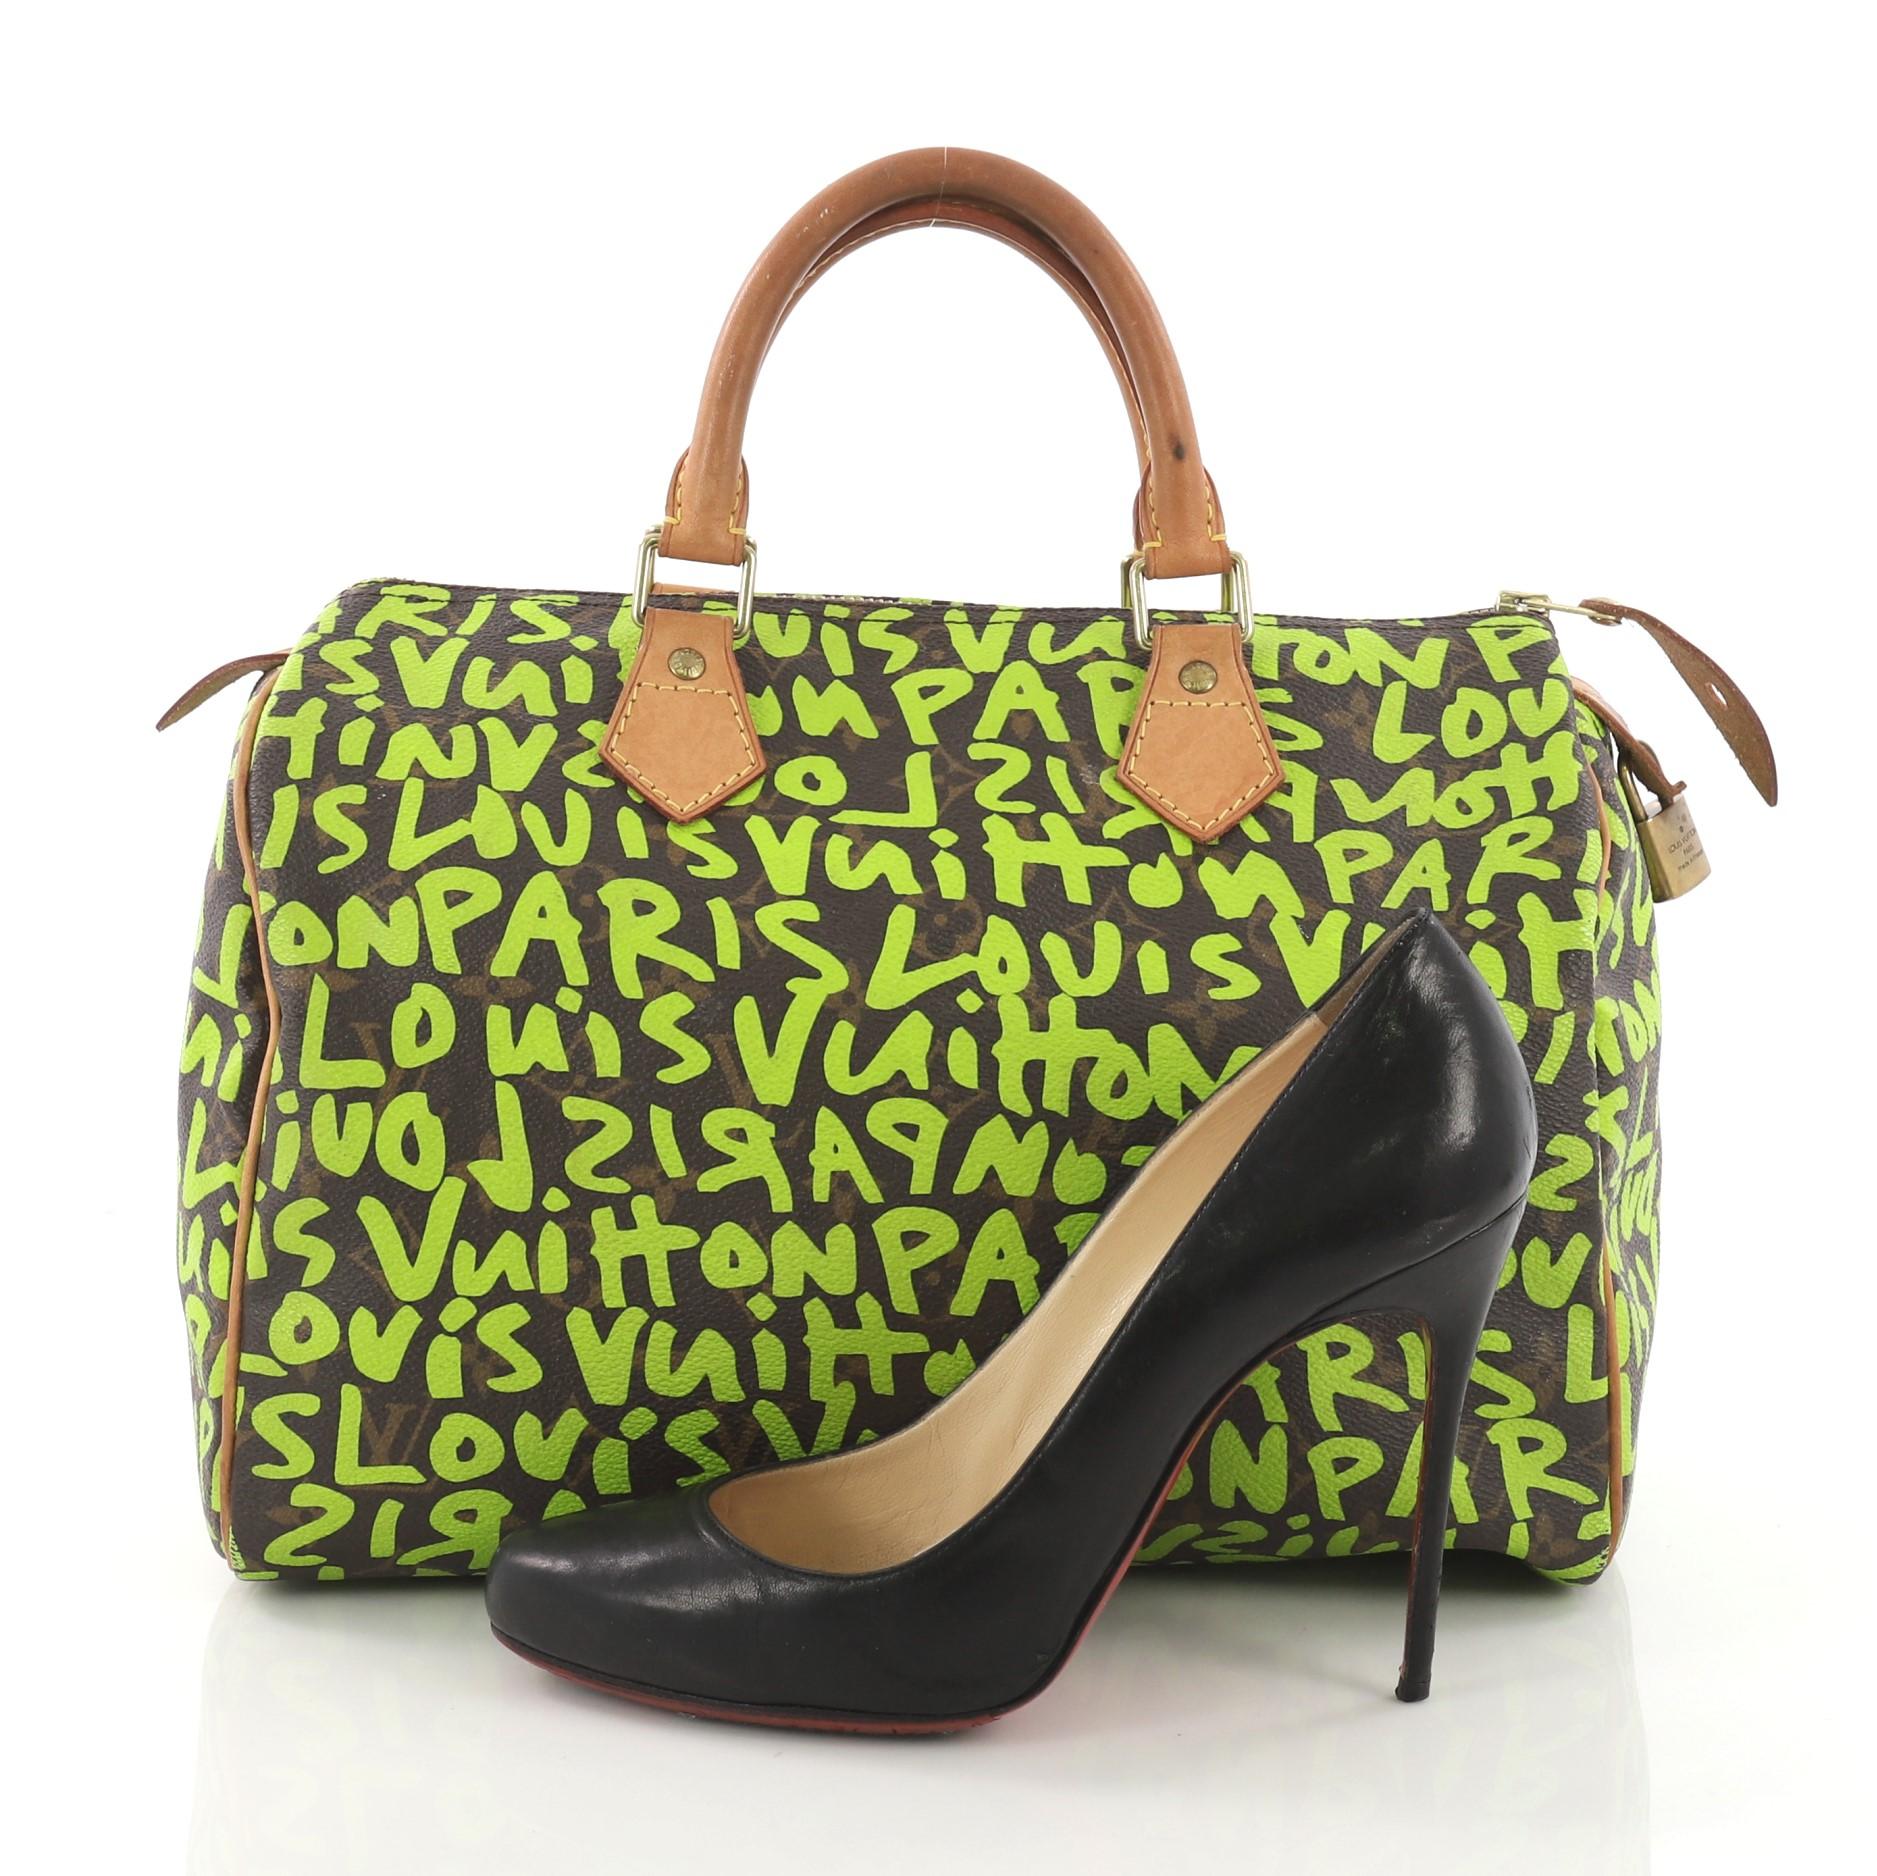 This Louis Vuitton Speedy Handbag Limited Edition Monogram Graffiti Canvas 30, crafted from green and brown limited edition monogram graffiti coated canvas, features cowhide leather handles and trims and gold-tone hardware . Its zip closure opens to